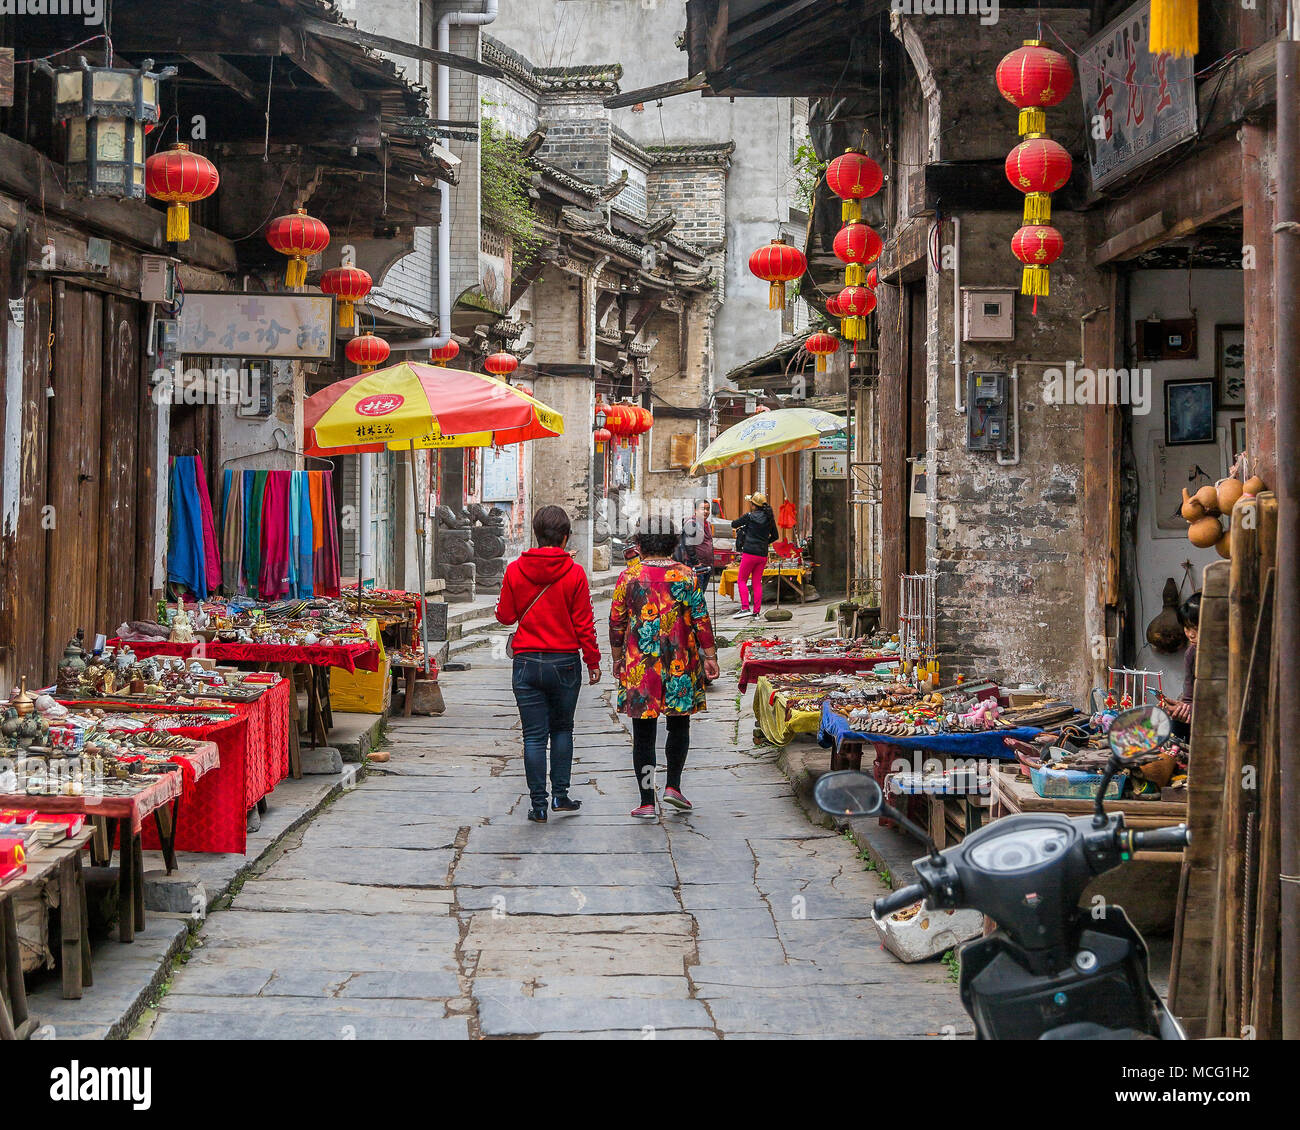 Chinese tourists wander among the shops and stalls of Daxu market. Cheap trinkets, mementos and jewellery line the street. Daxu, China. Stock Photo